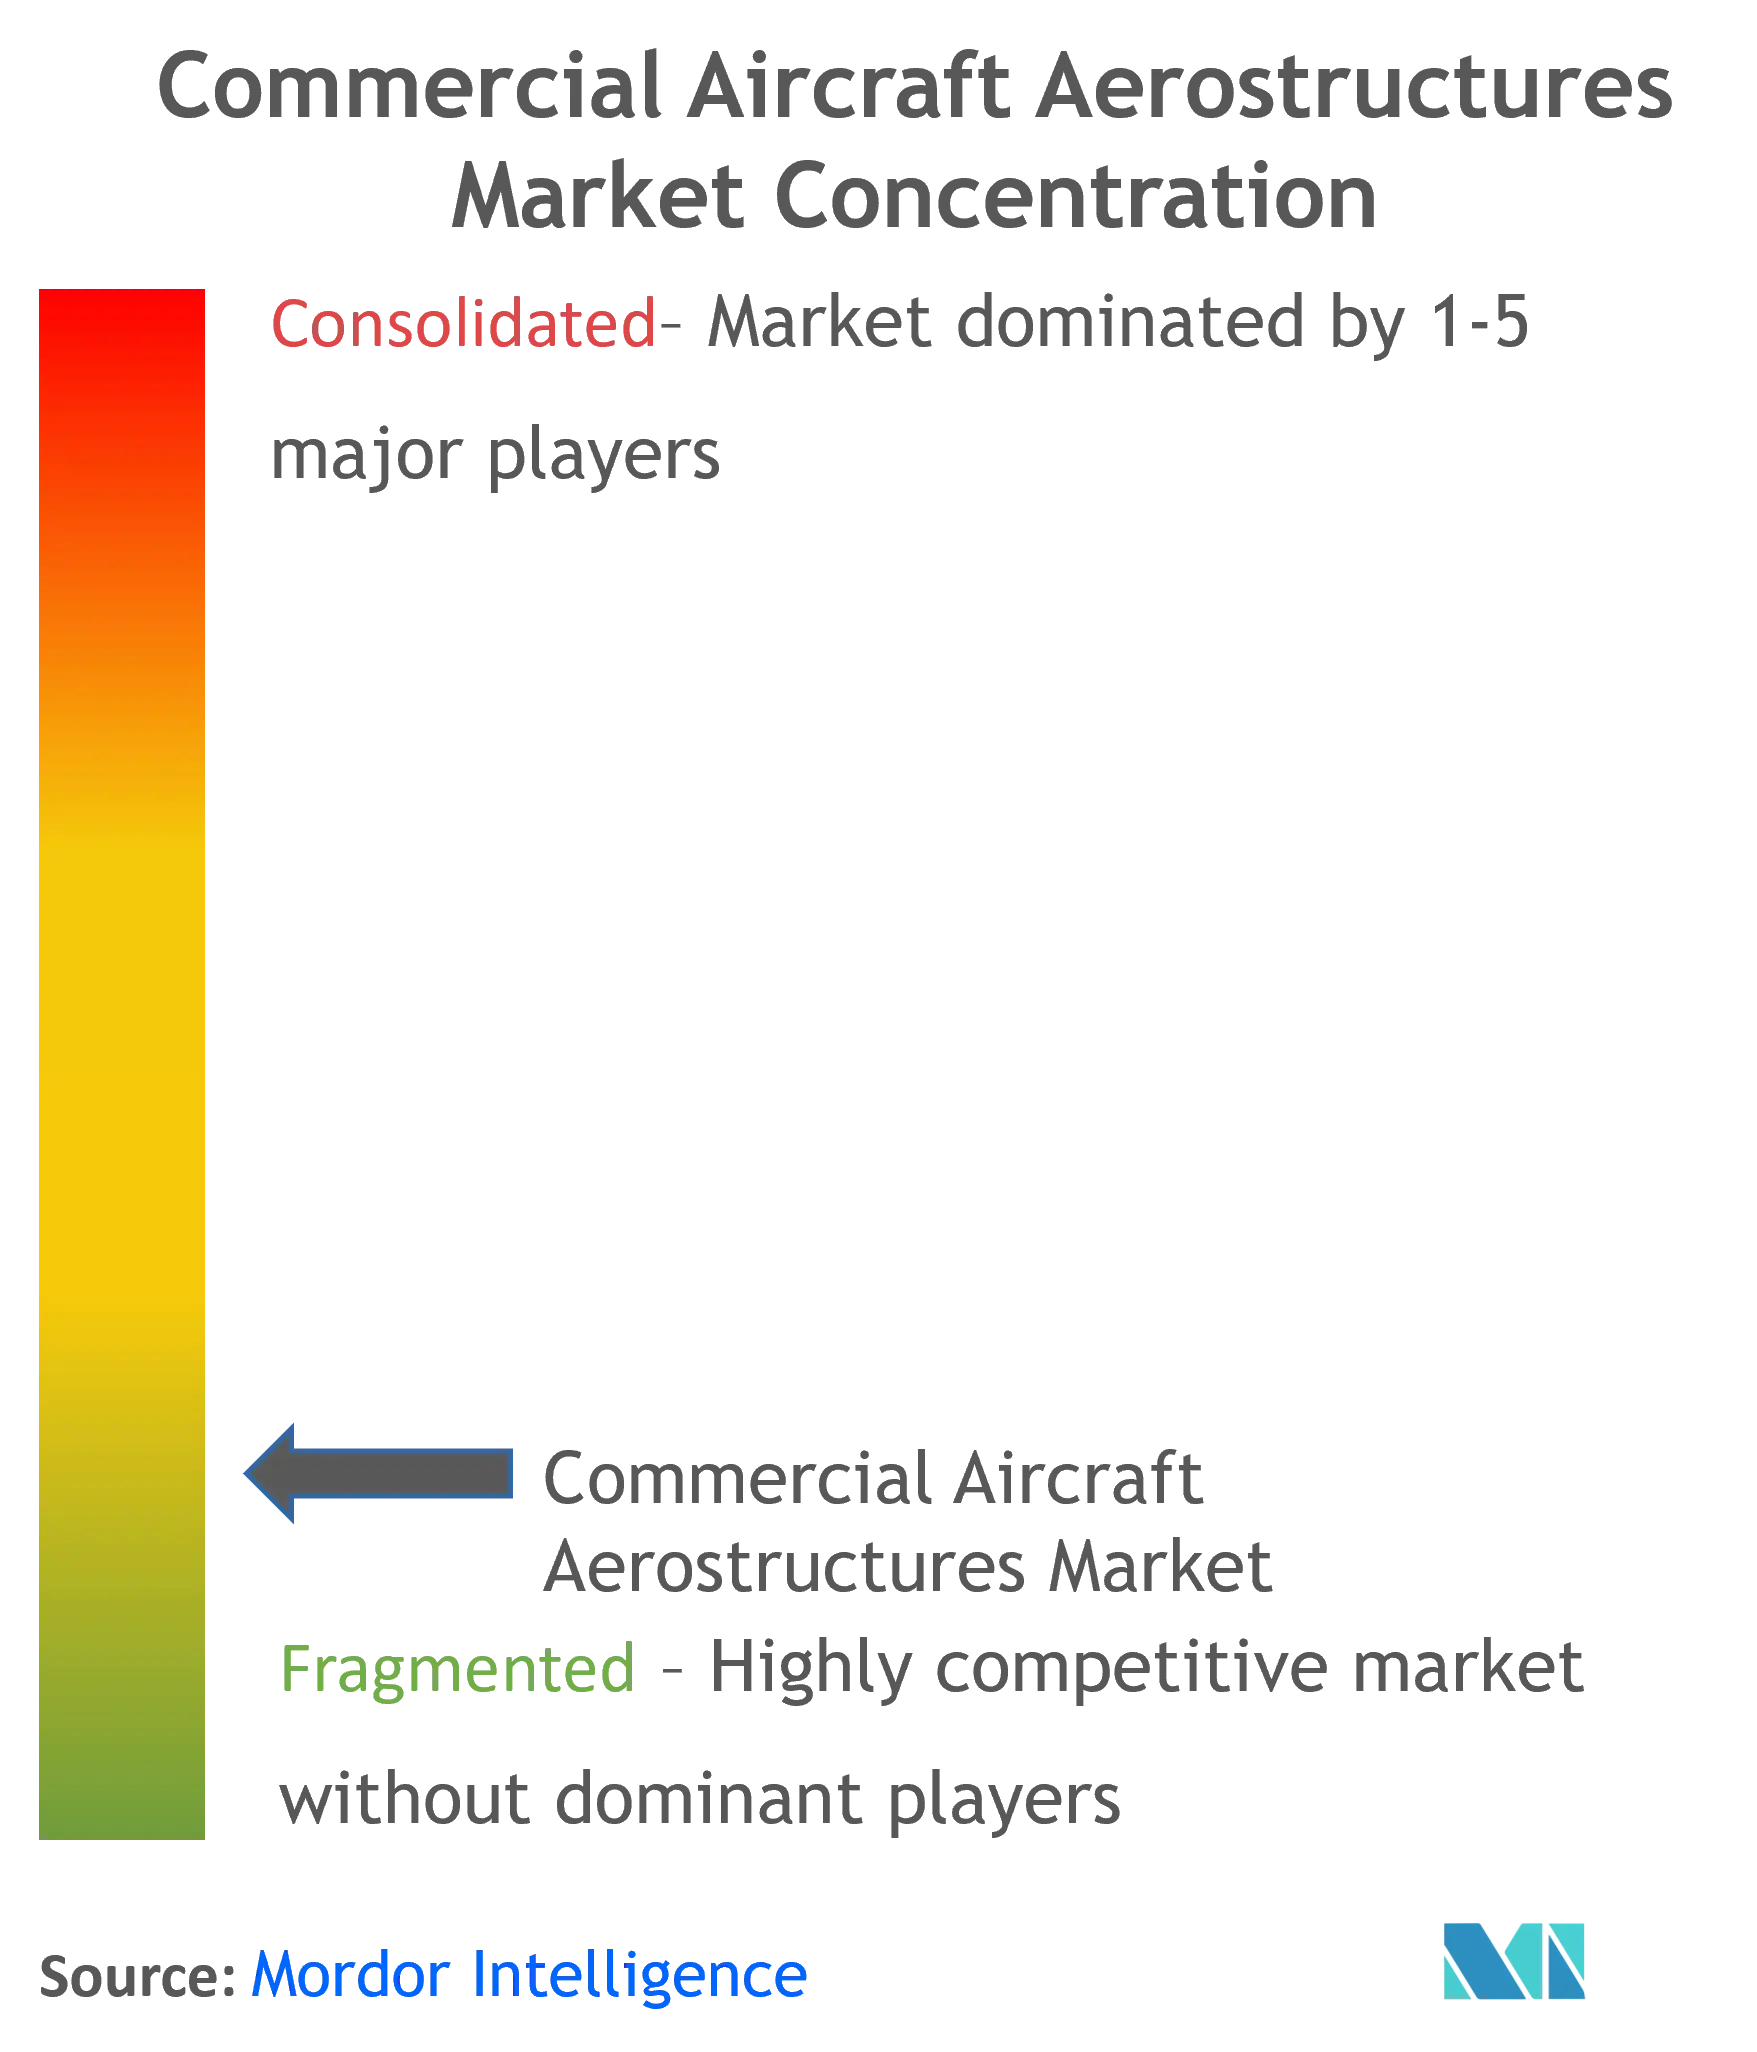 Commercial Aircraft Aerostructures Market Concentration